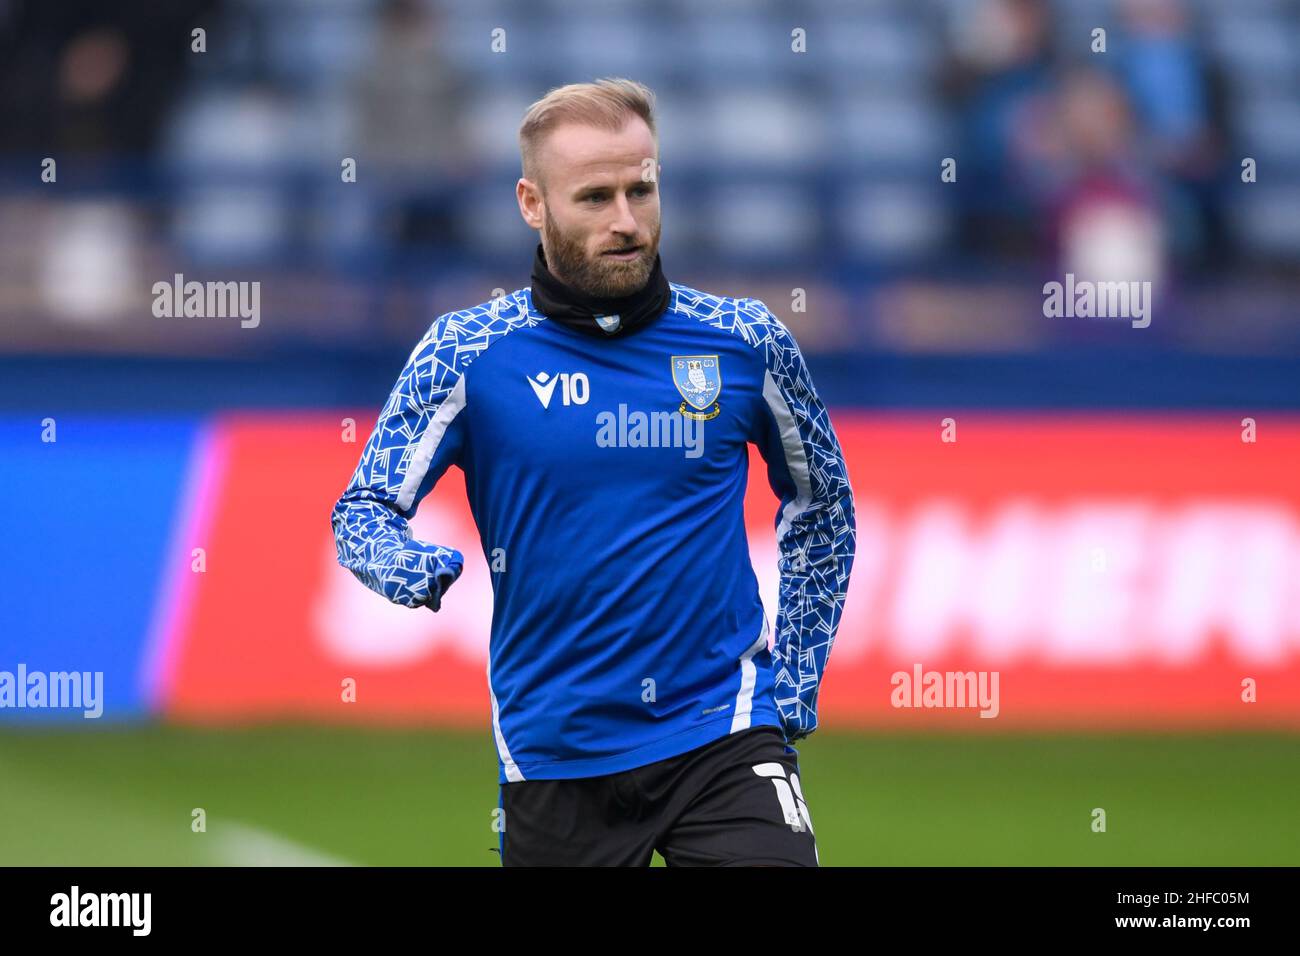 Sheffield Uk 15th Jan 22 Barry Bannan 10 Of Sheffield Wednesday Warming Up Before The Game In Sheffield United Kingdom On 1 15 22 Photo By Simon Whitehead News Images Sipa Usa Credit Sipa Usa Alamy Live